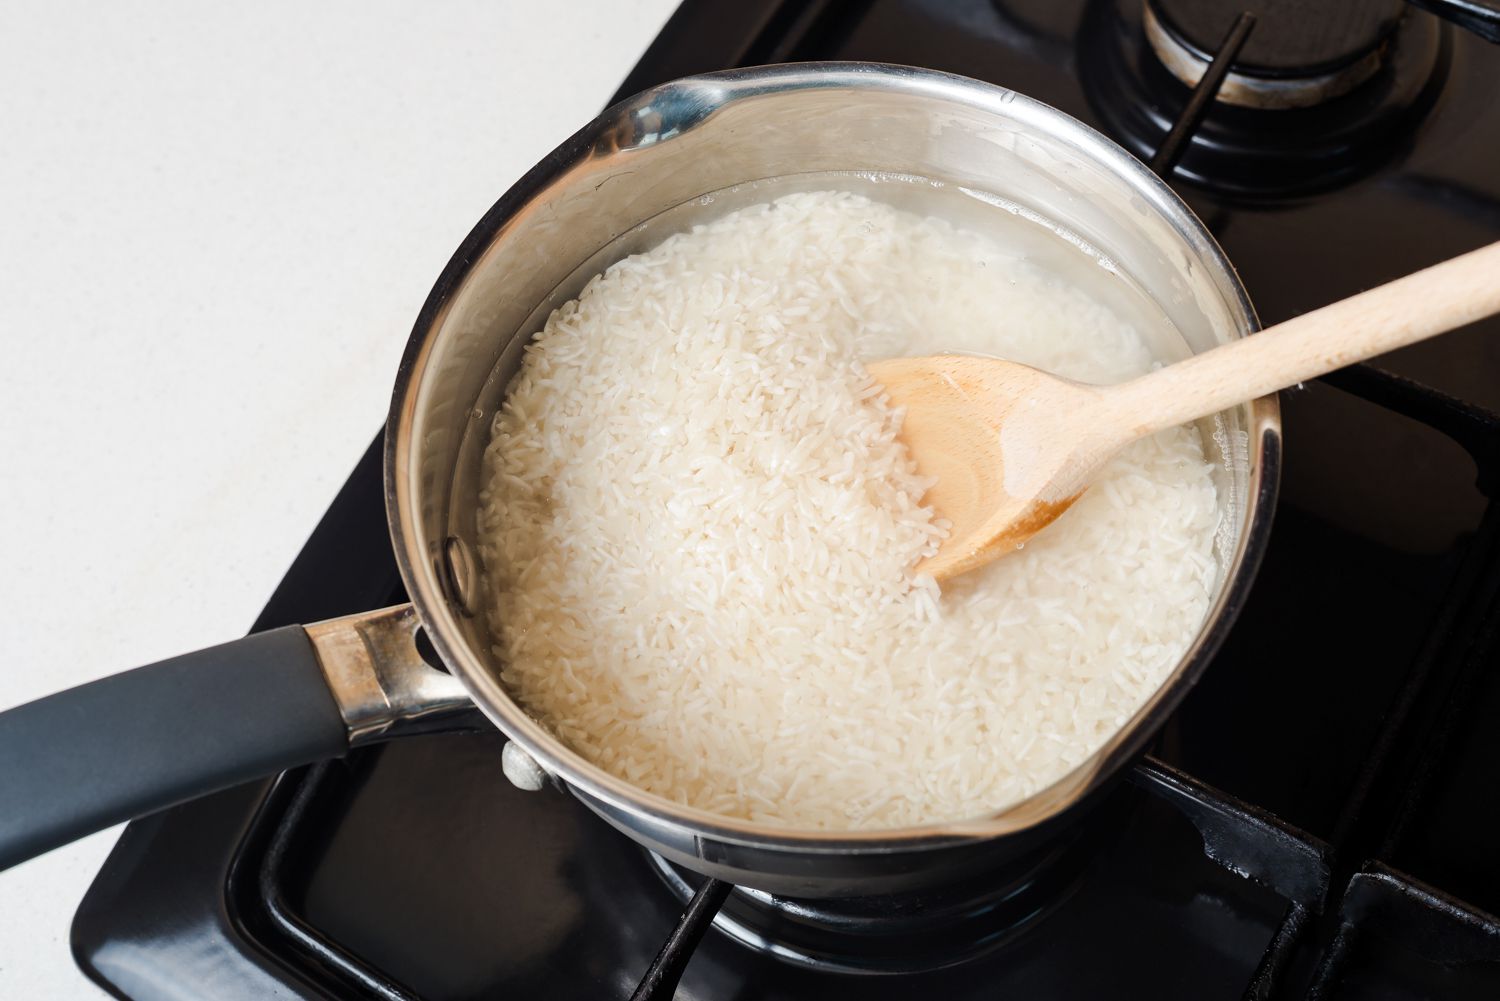 How To Cook Rice In Stainless Steel Pot 